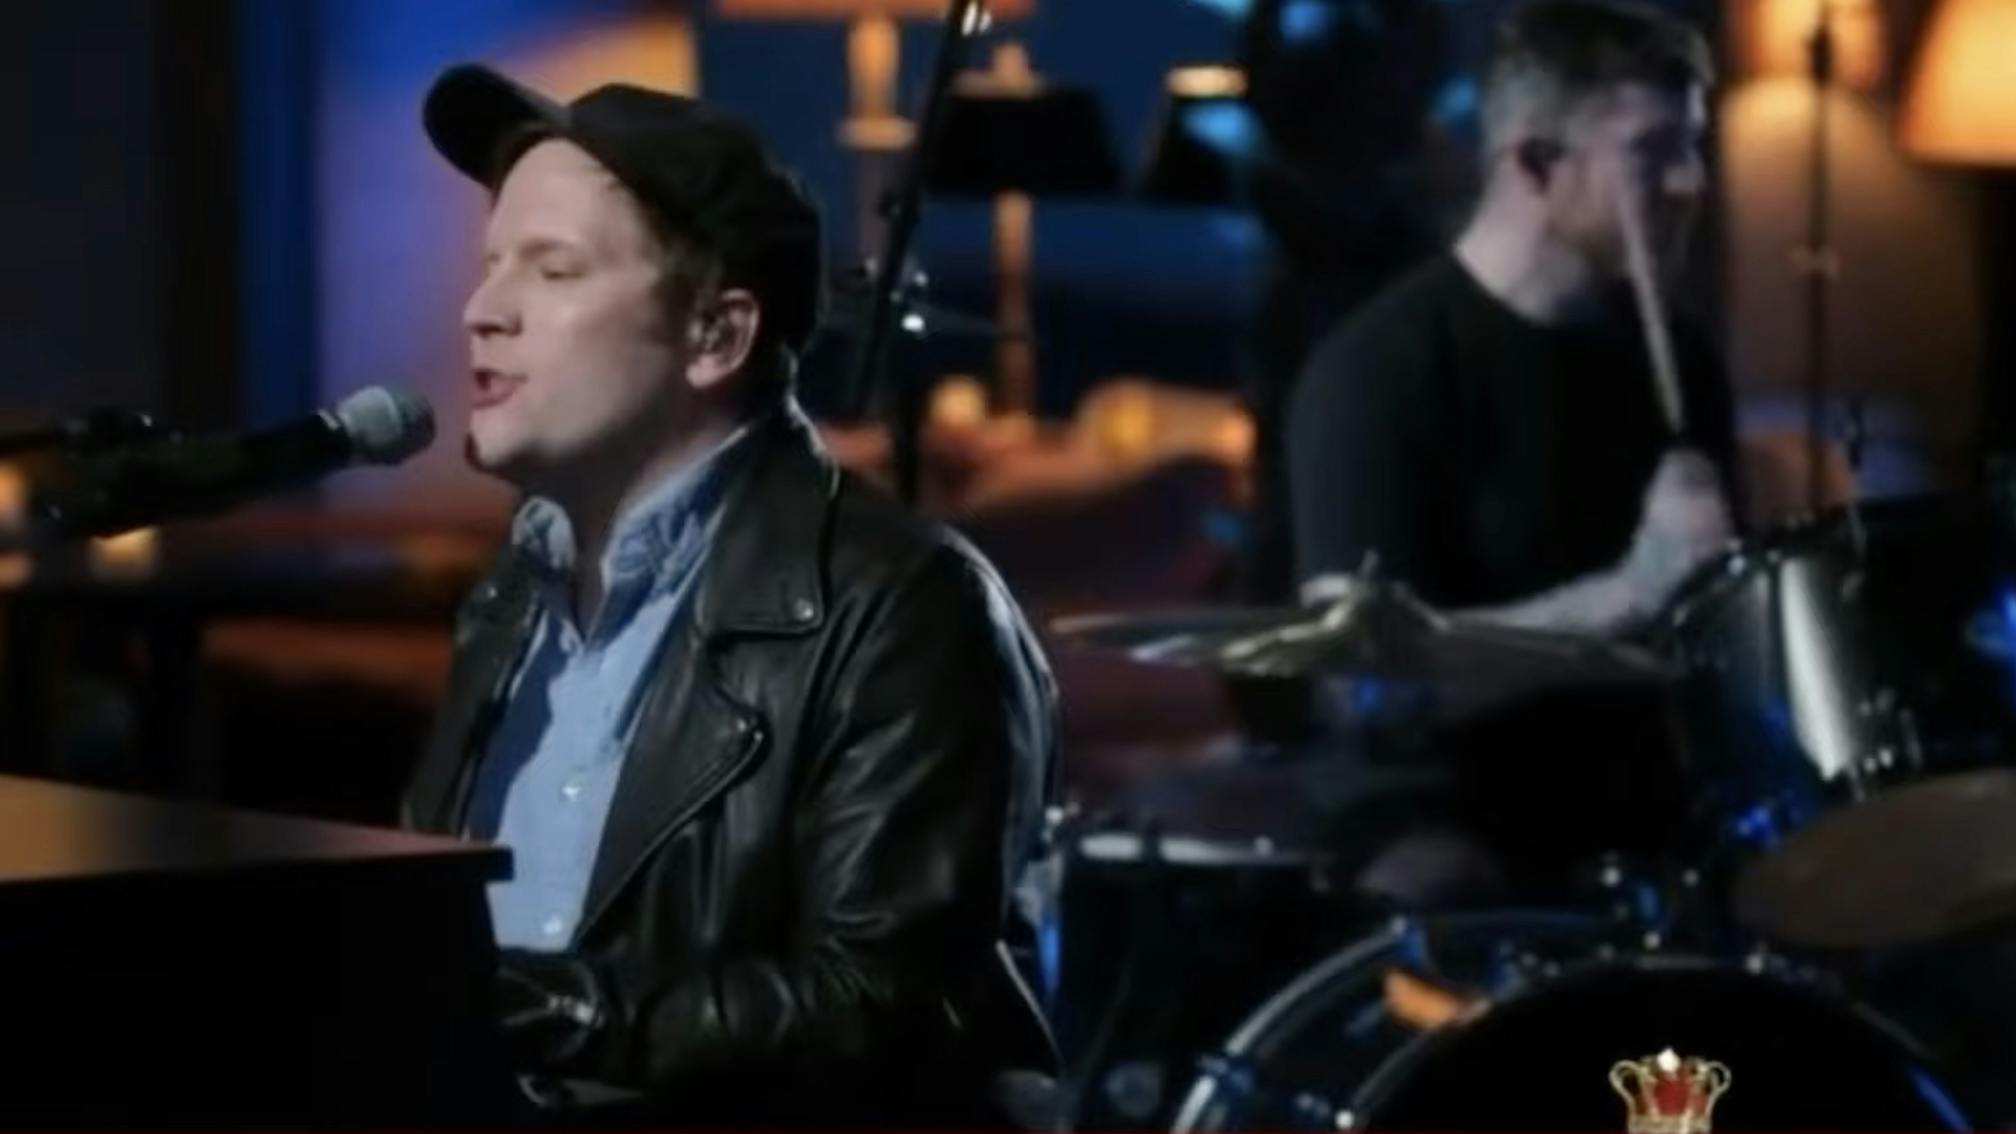 Watch: Fall Out Boy perform impressive cover of Under Pressure